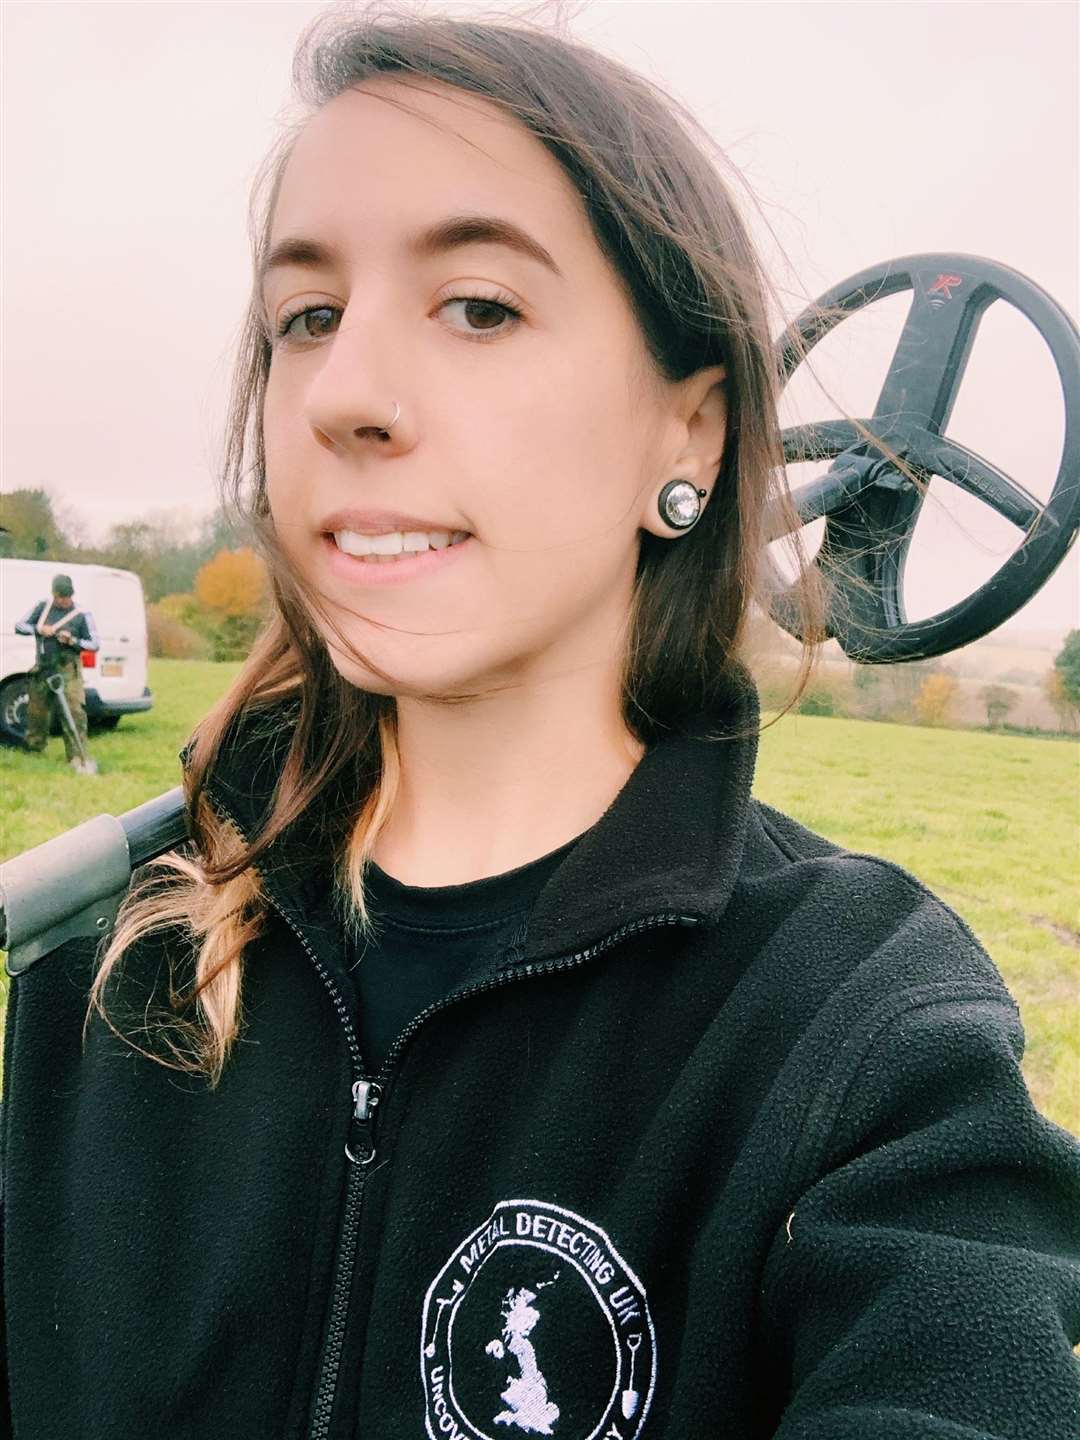 Emma Pierce, 29, started metal detecting six years ago because of her love for history